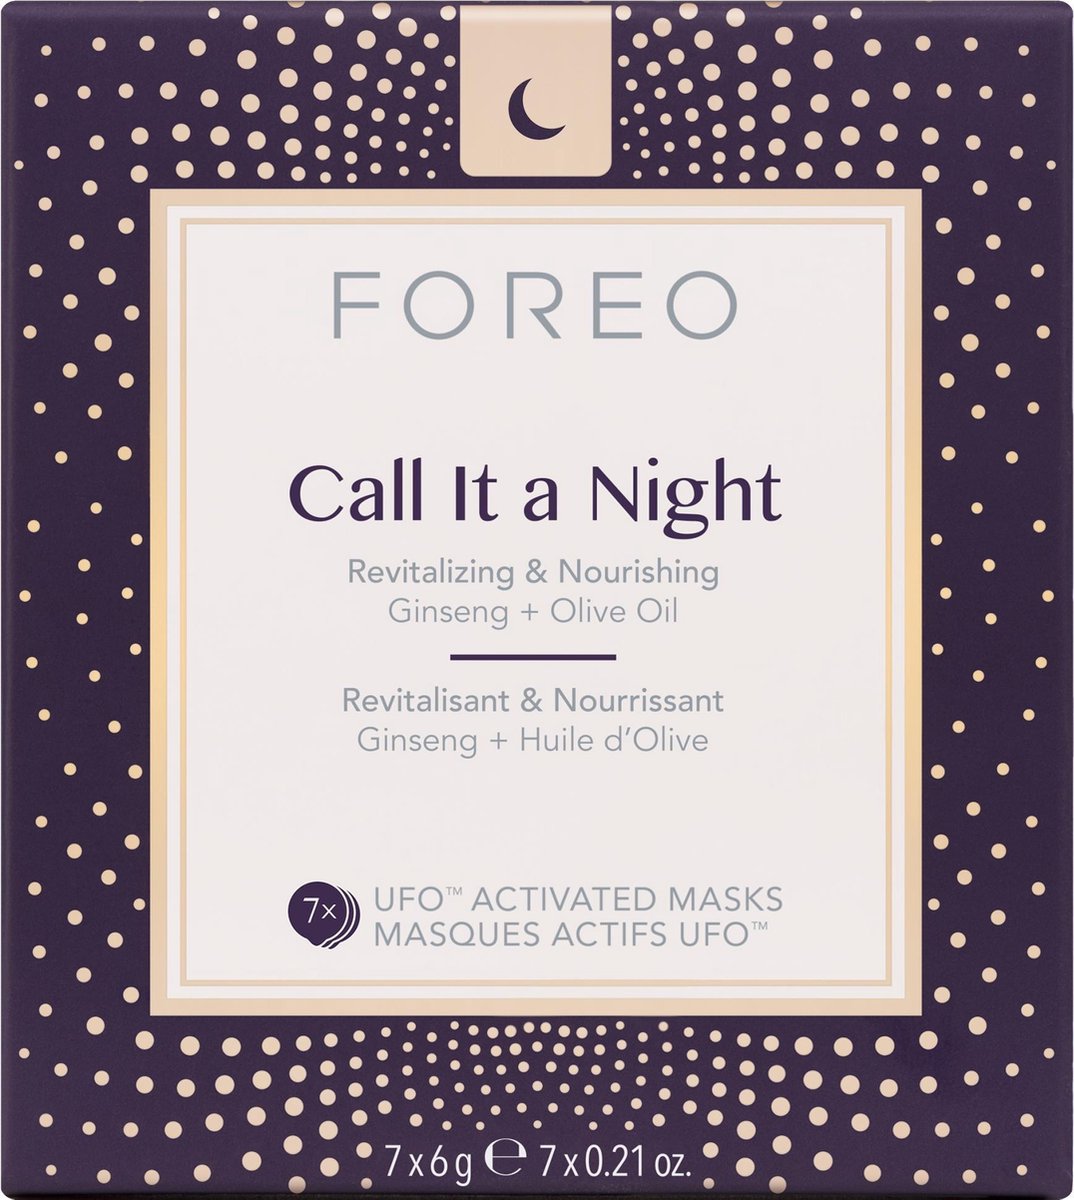 FOREO – Call it a Night Face Mask for UFO™ - FOREO